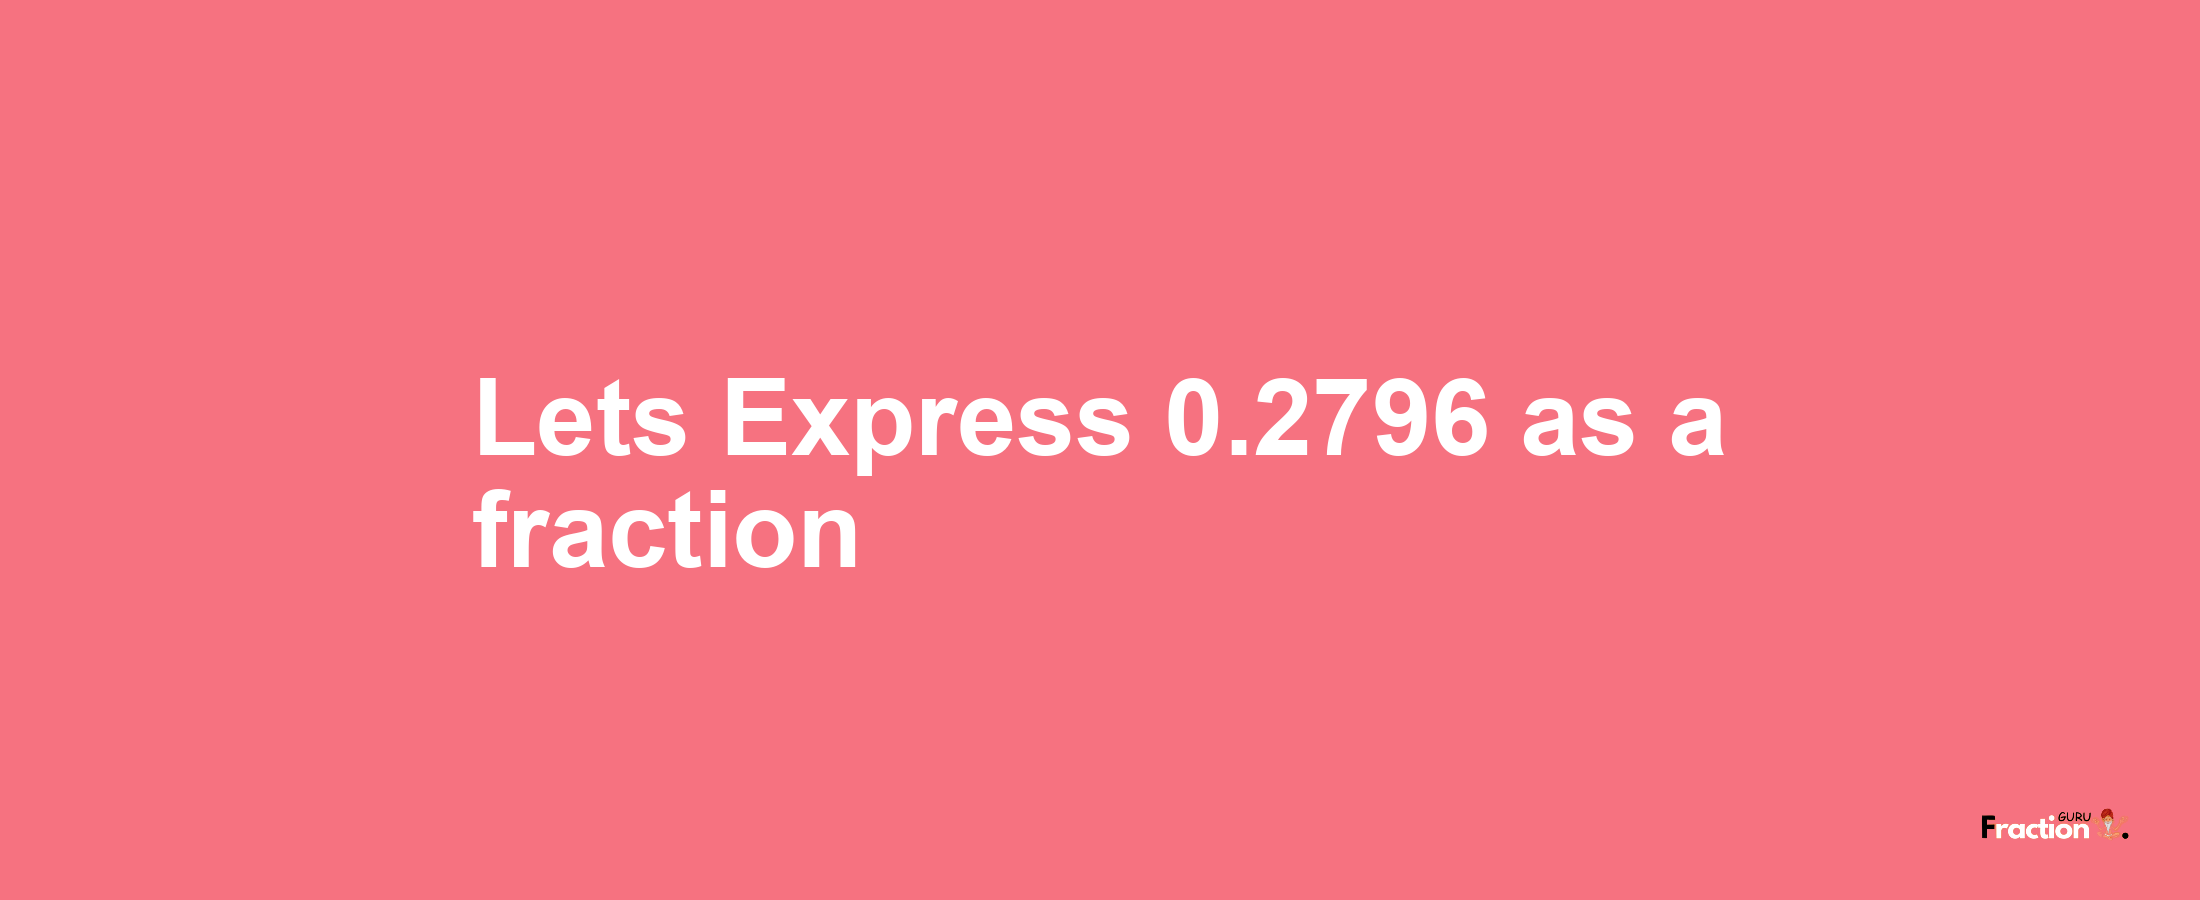 Lets Express 0.2796 as afraction